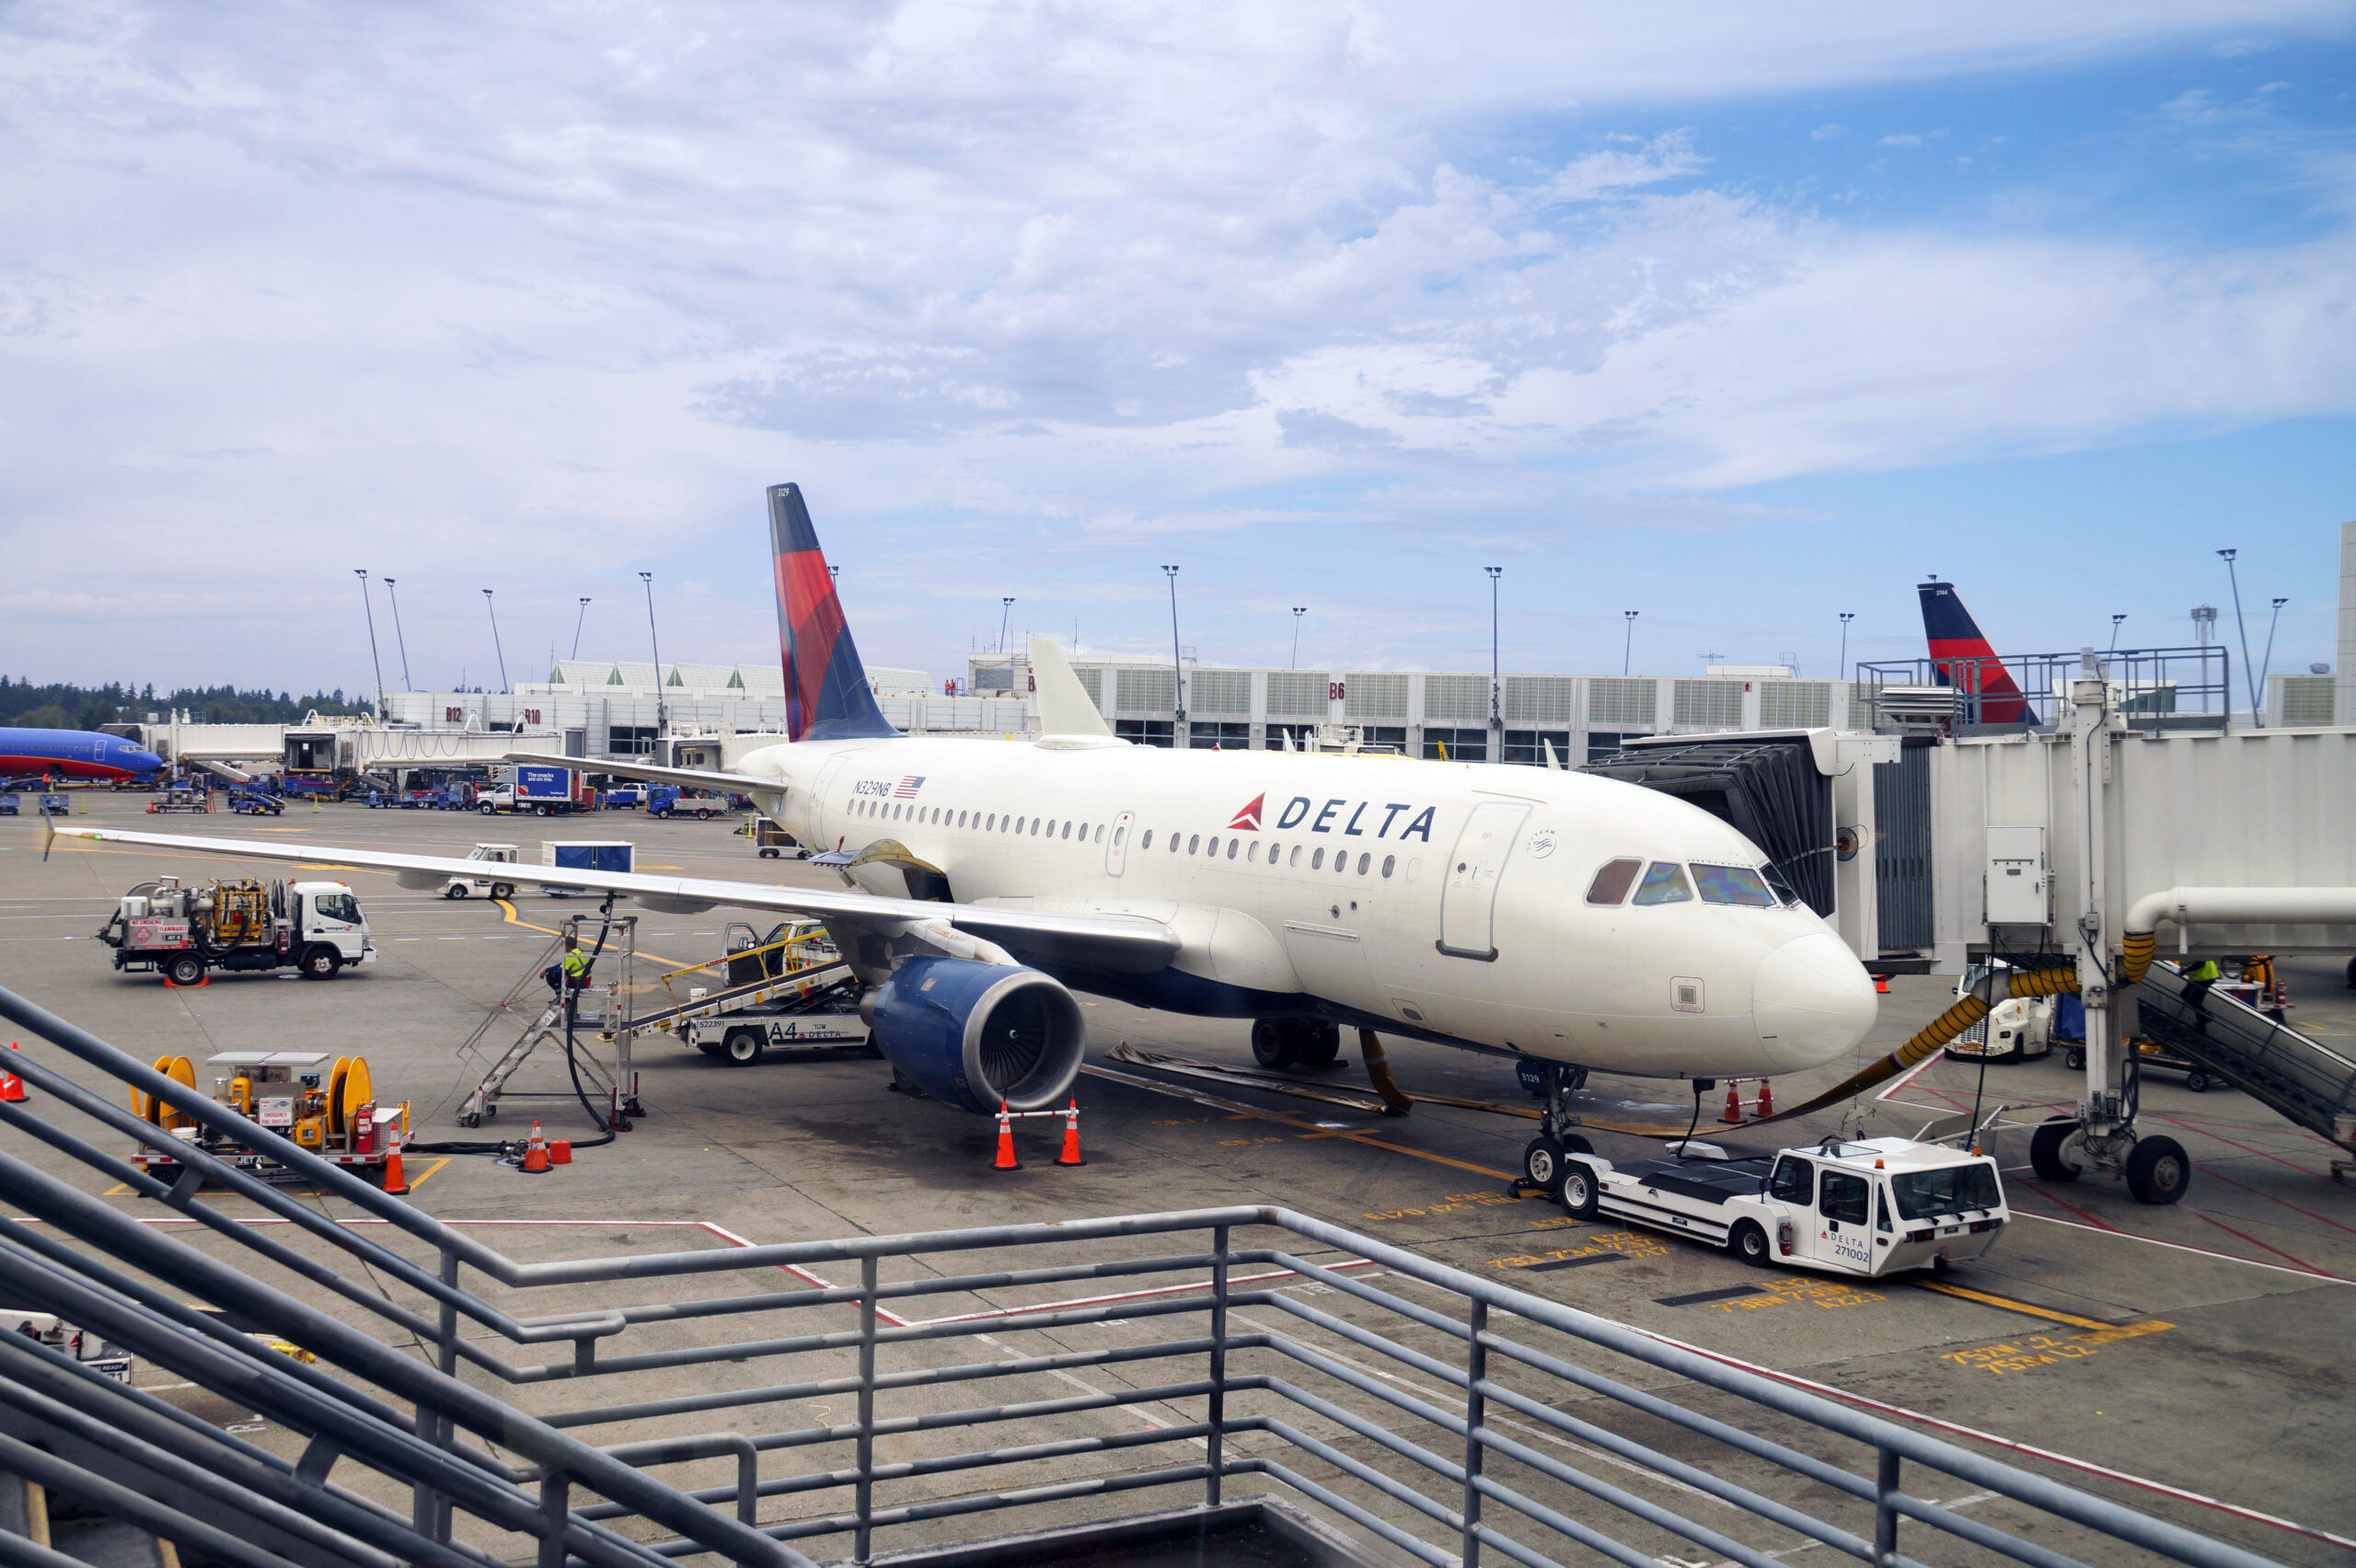 Seattle–Tacoma International Airport. Ground handling of the Delta aircraft. August 2019.